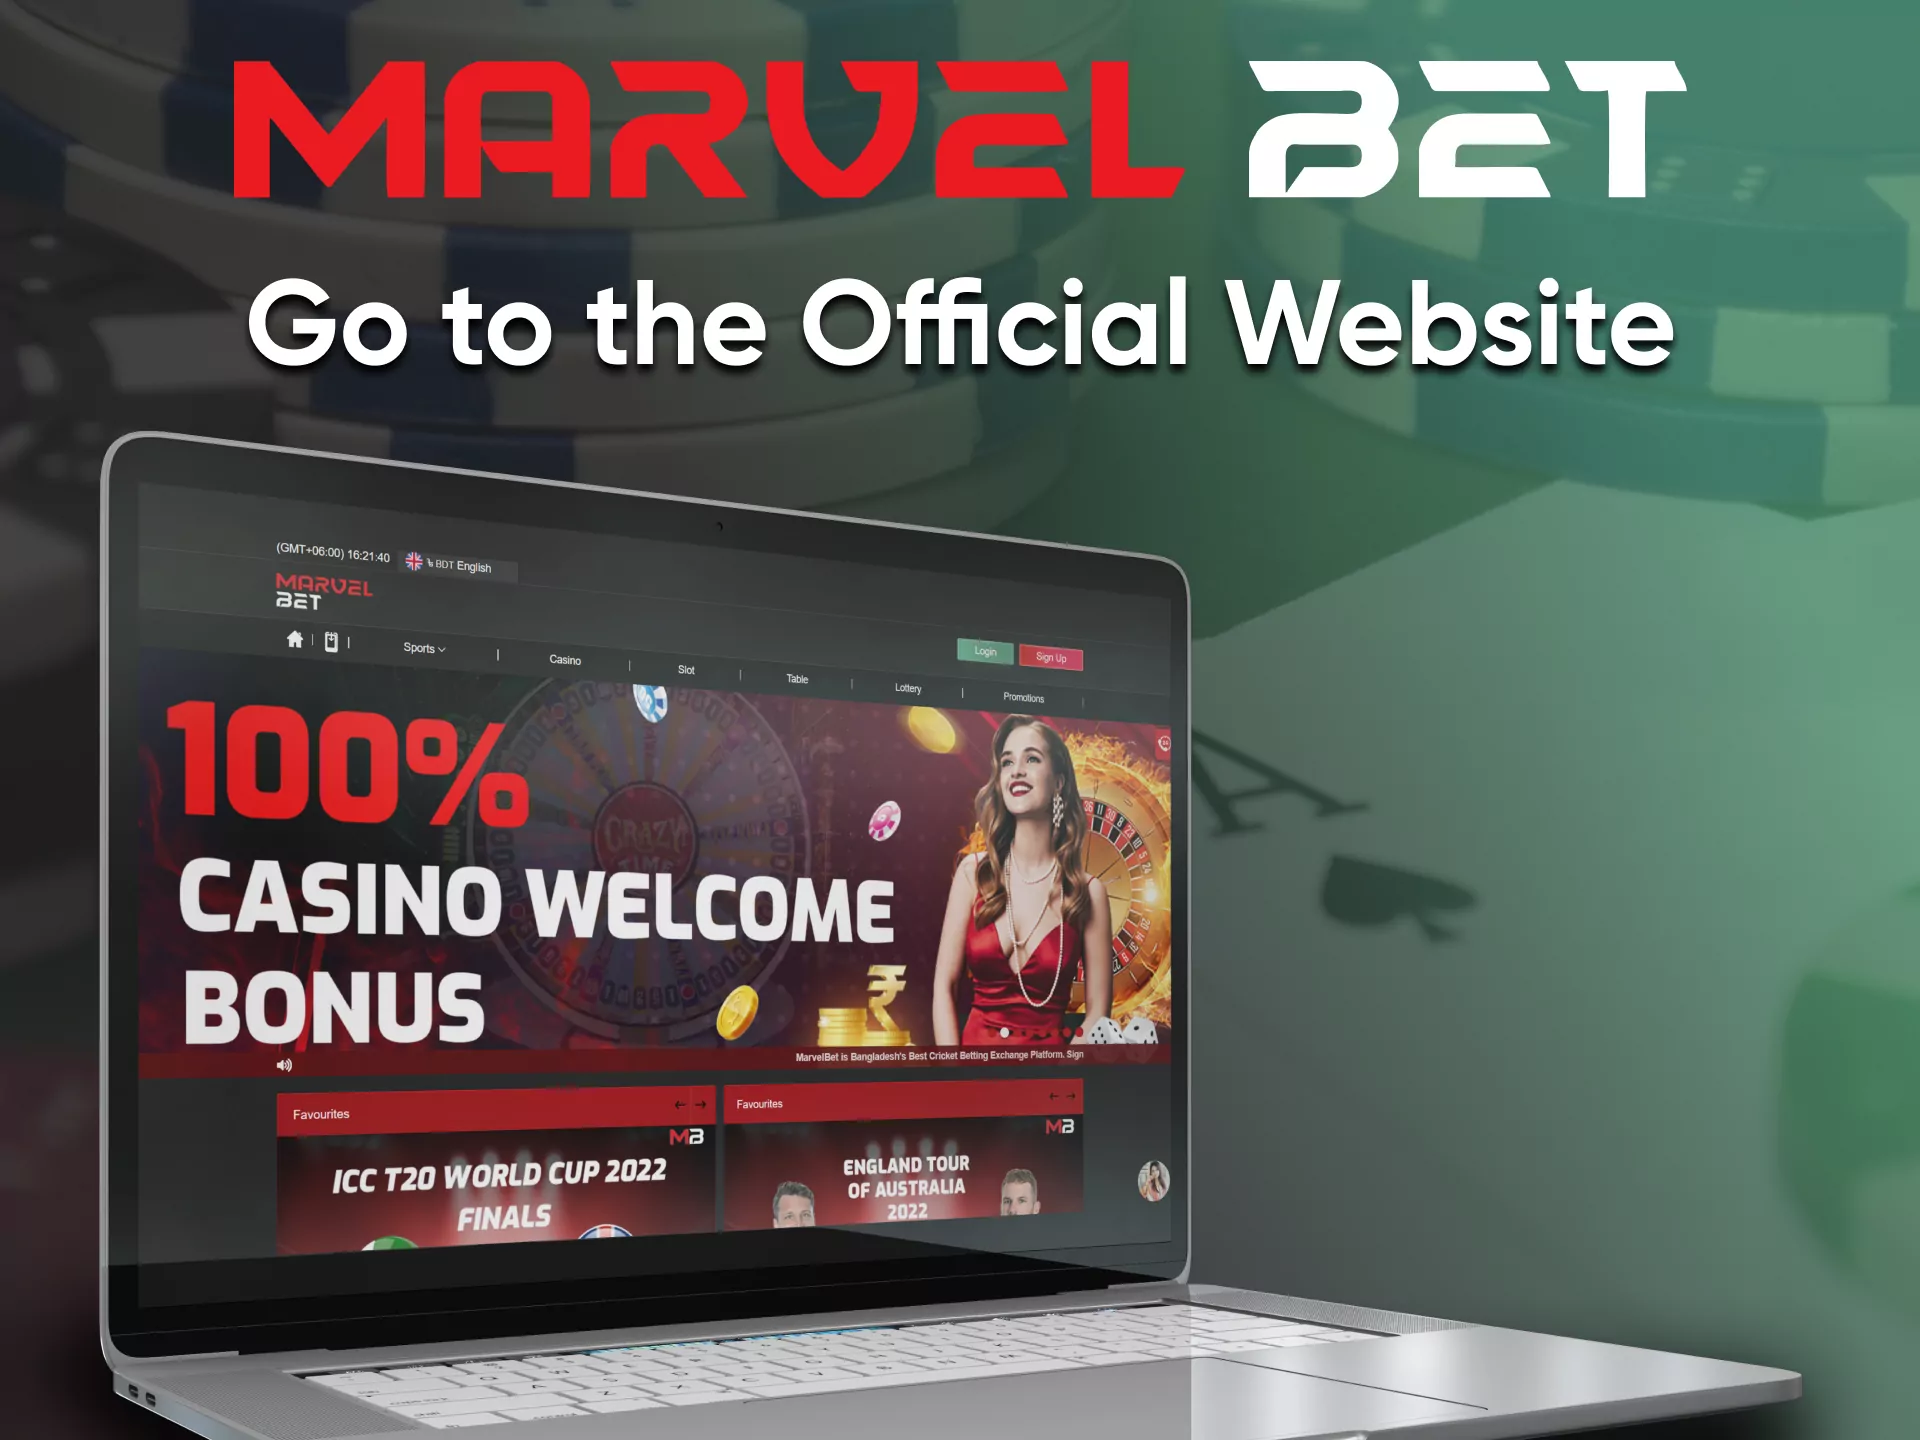 For casino games from Marvelbet, please register.